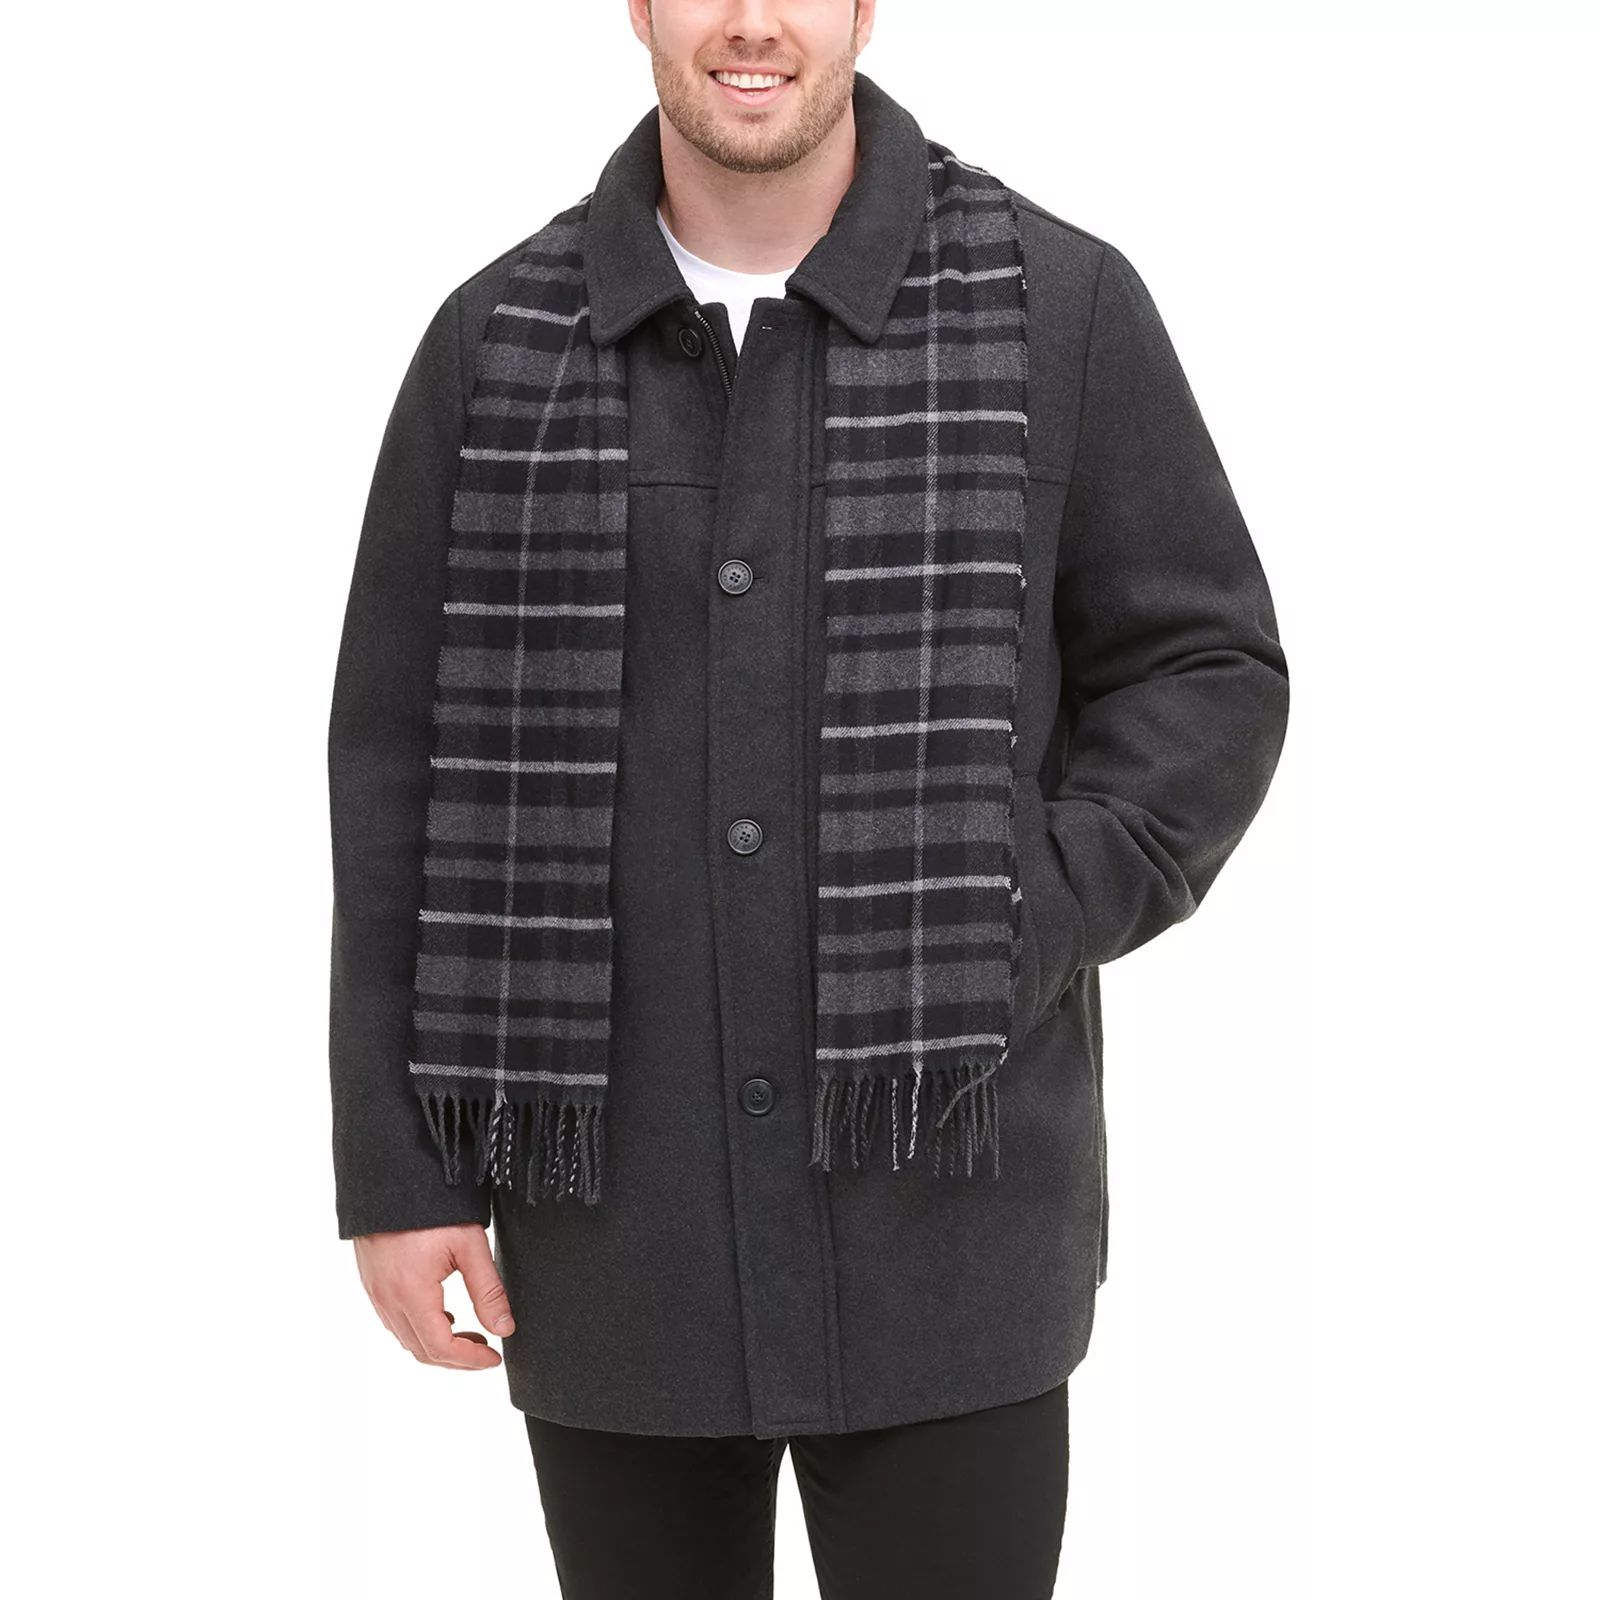 Big & Tall Dockers Wool-Blend Car Coat with Plaid Scarf, Men's, Size: Large Tall, Dark Grey | Kohl's